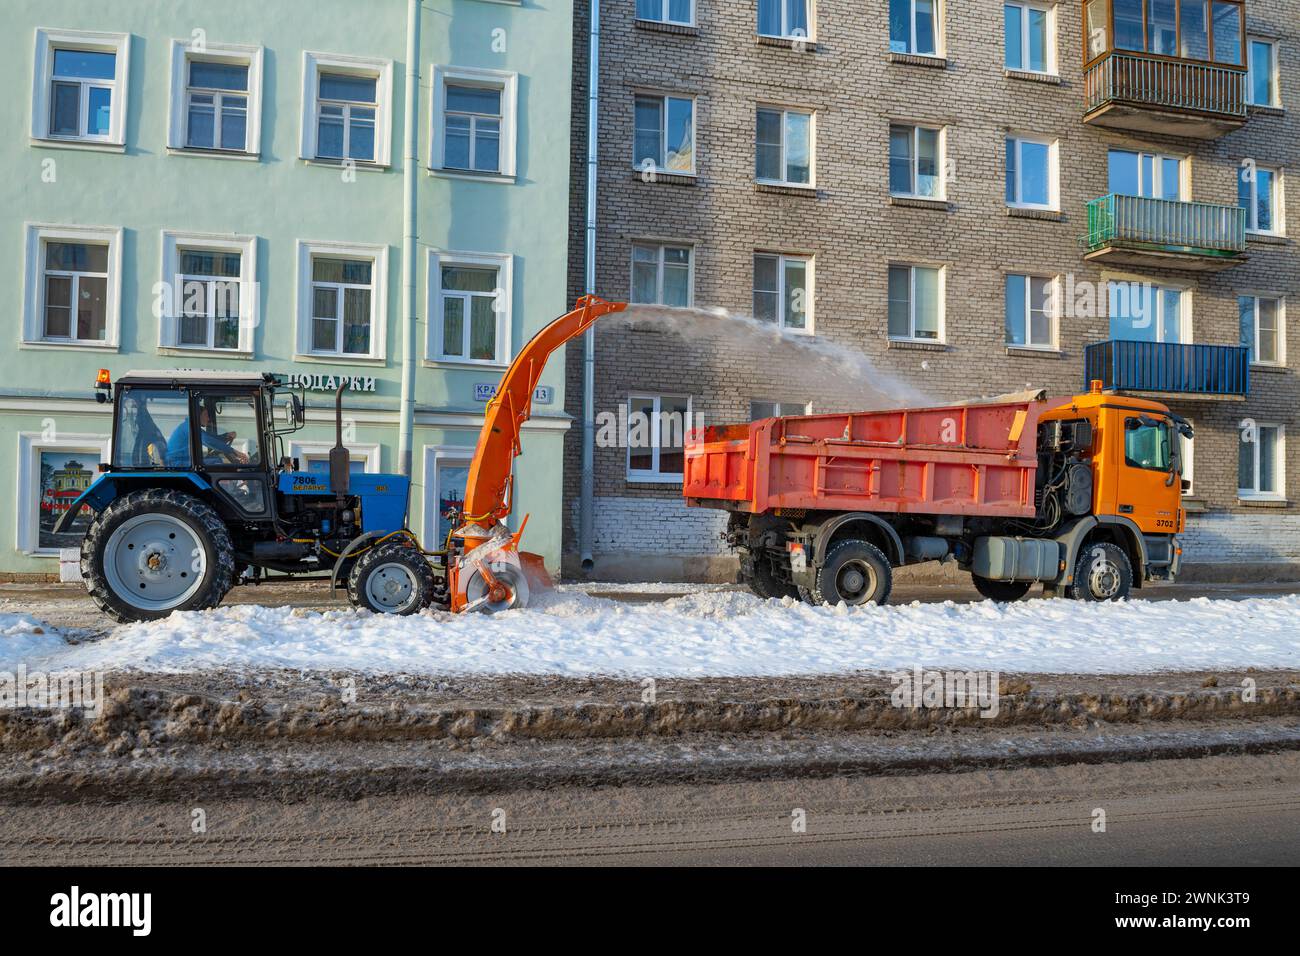 KRONSTADT, RUSSIA - JANUARY 18, 2022:  Tractor MTZ-82.1 tractor with a mounted snow blower clears snow from the sidewalk of a city street Stock Photo